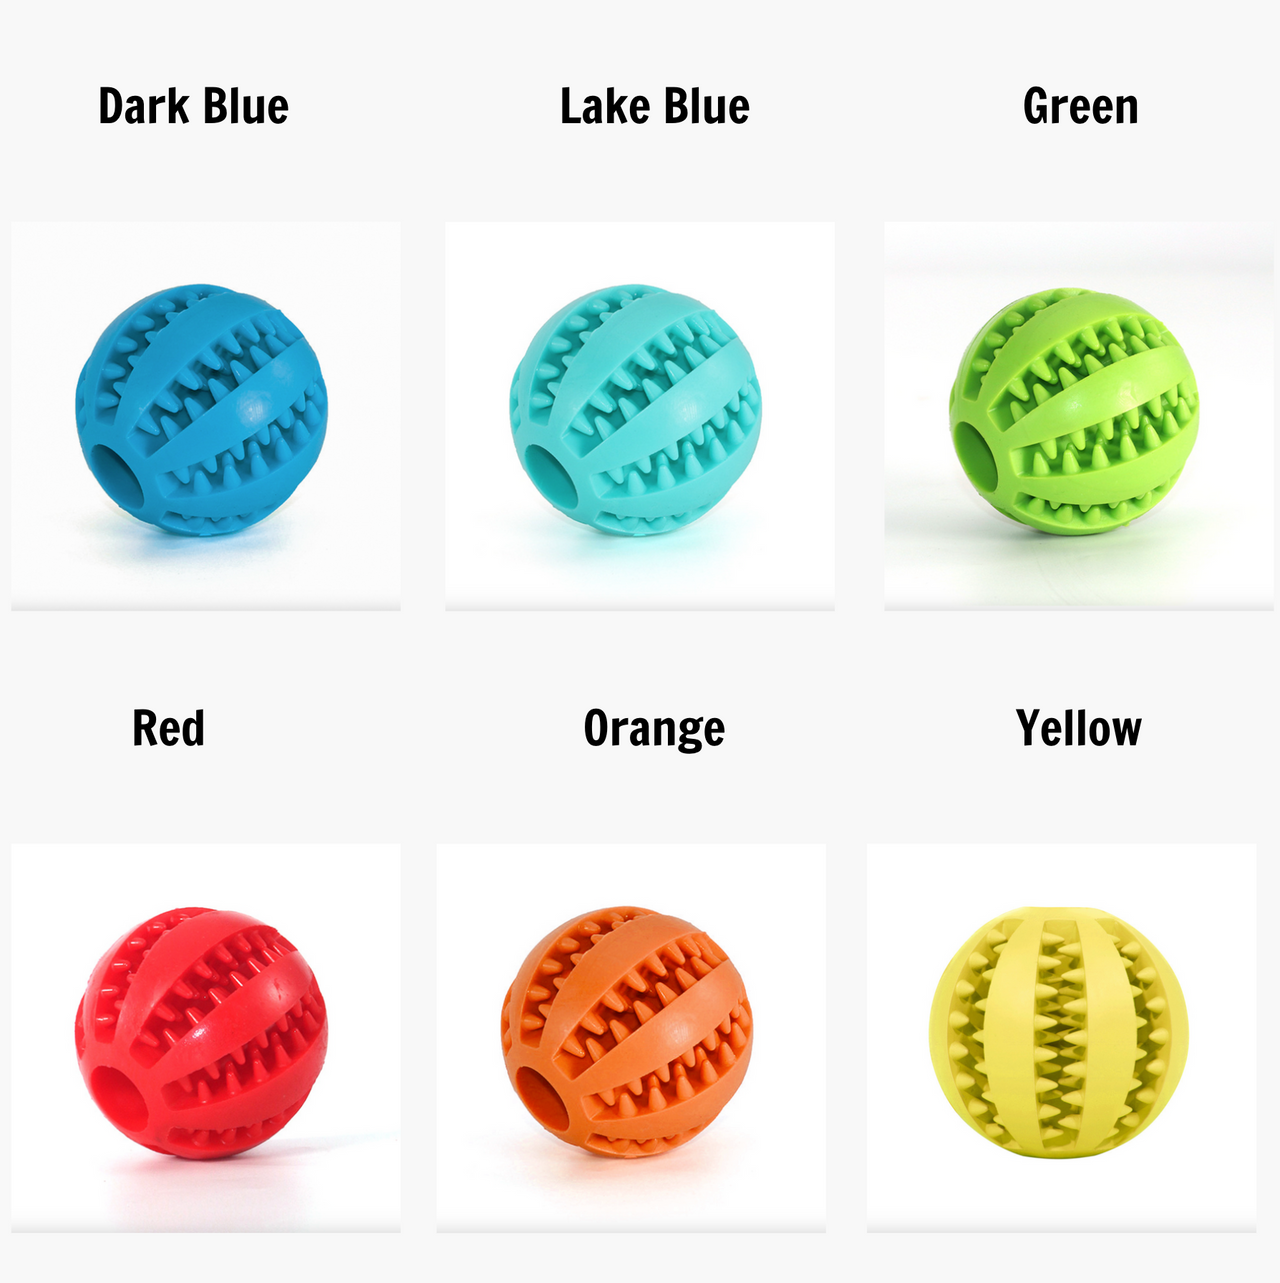 Interactive Rubber Pet Dog Toy Balls for Small and Large Dogs, Dog Toy JonxiFon